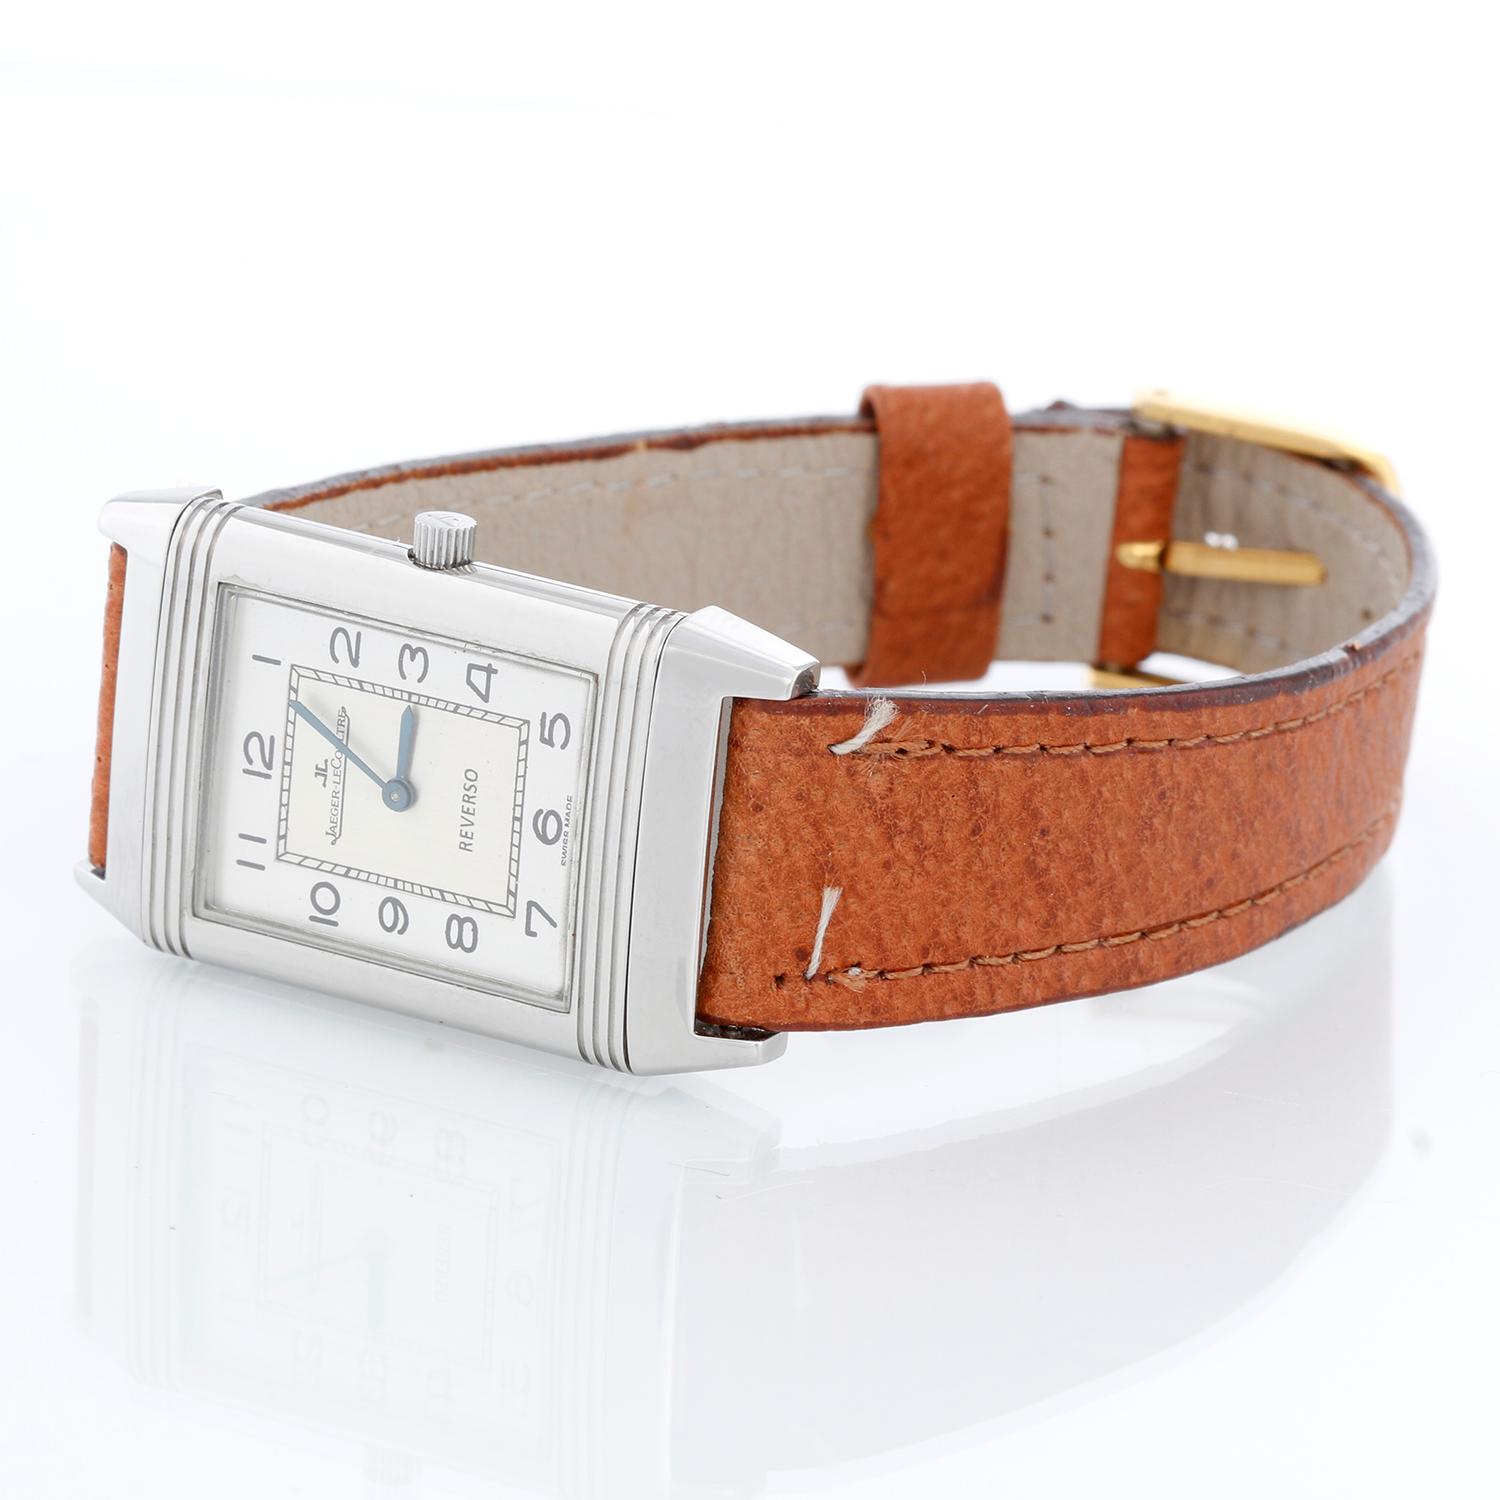 Jaeger Reverso Silver Dial Mens Watch 2500.8.86 - Manual widning. Stainless steel case ( 23 x 39 mm ). Silver Dial. Brown strap with buckle. Pre-owned with custom box.